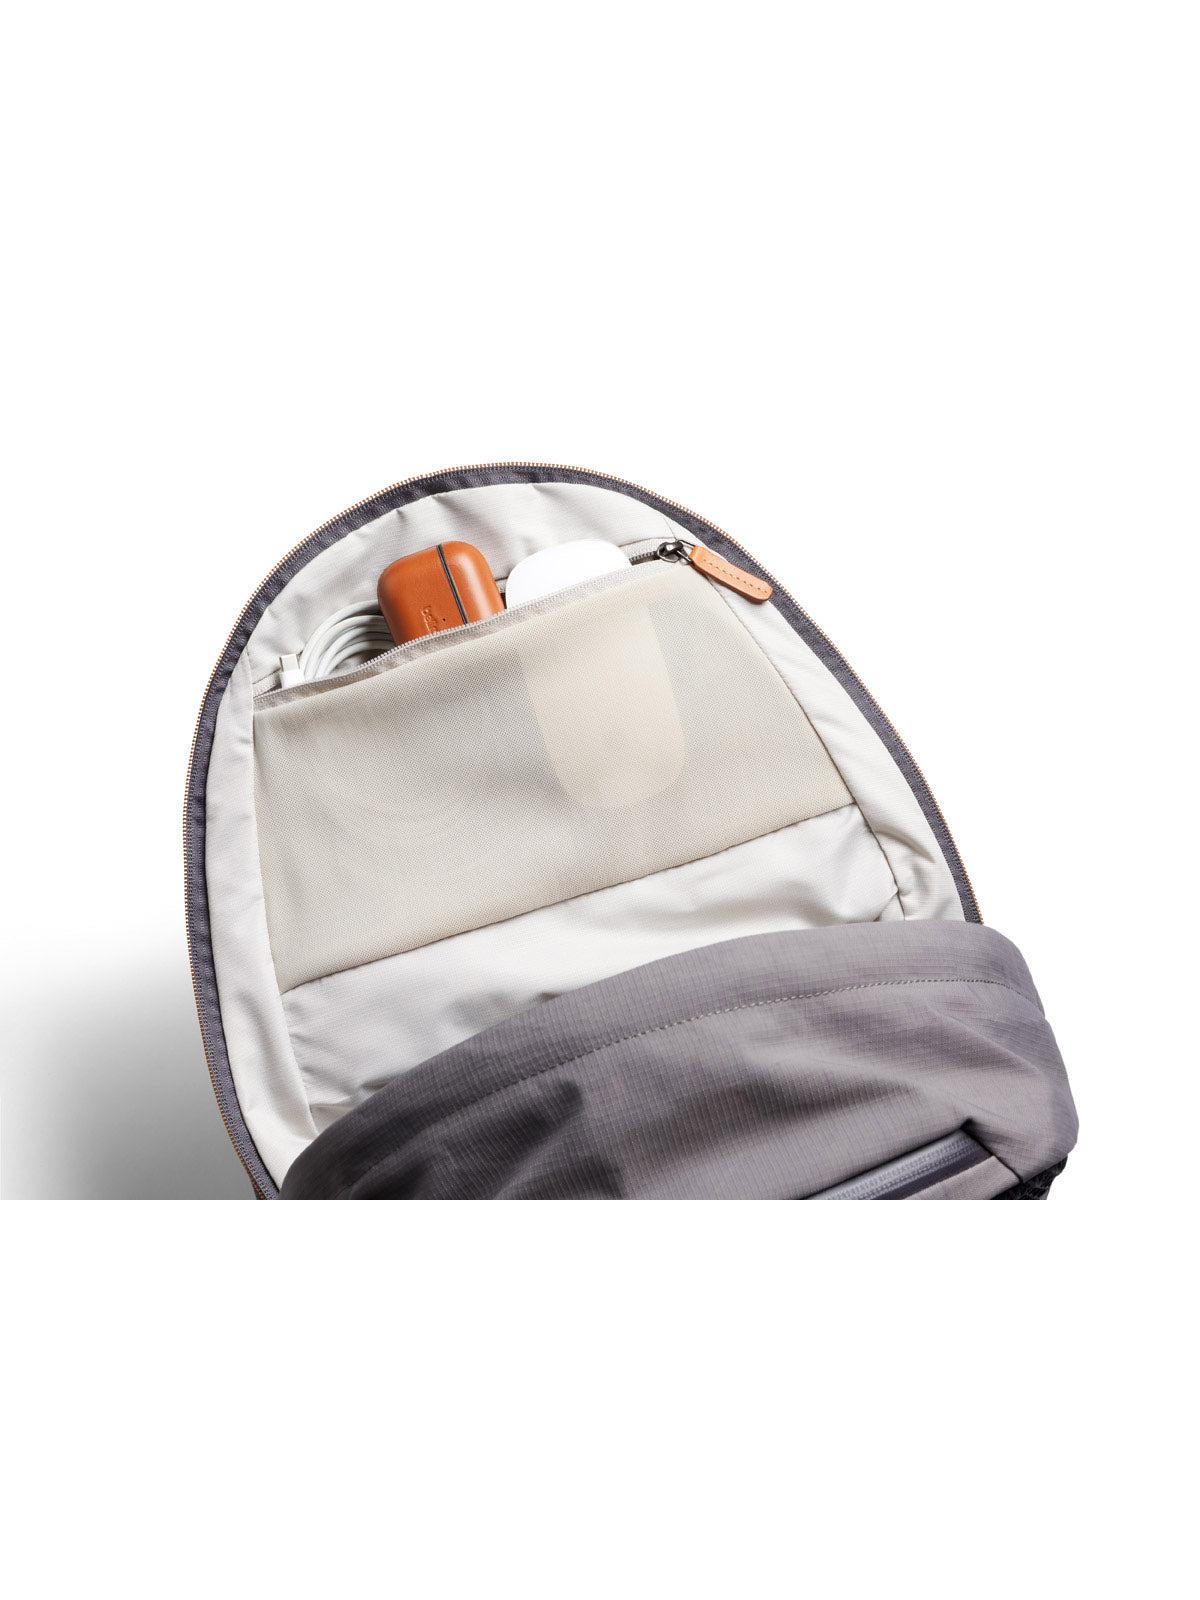 Bellroy Classic Backpack Premium Edition Storm Grey